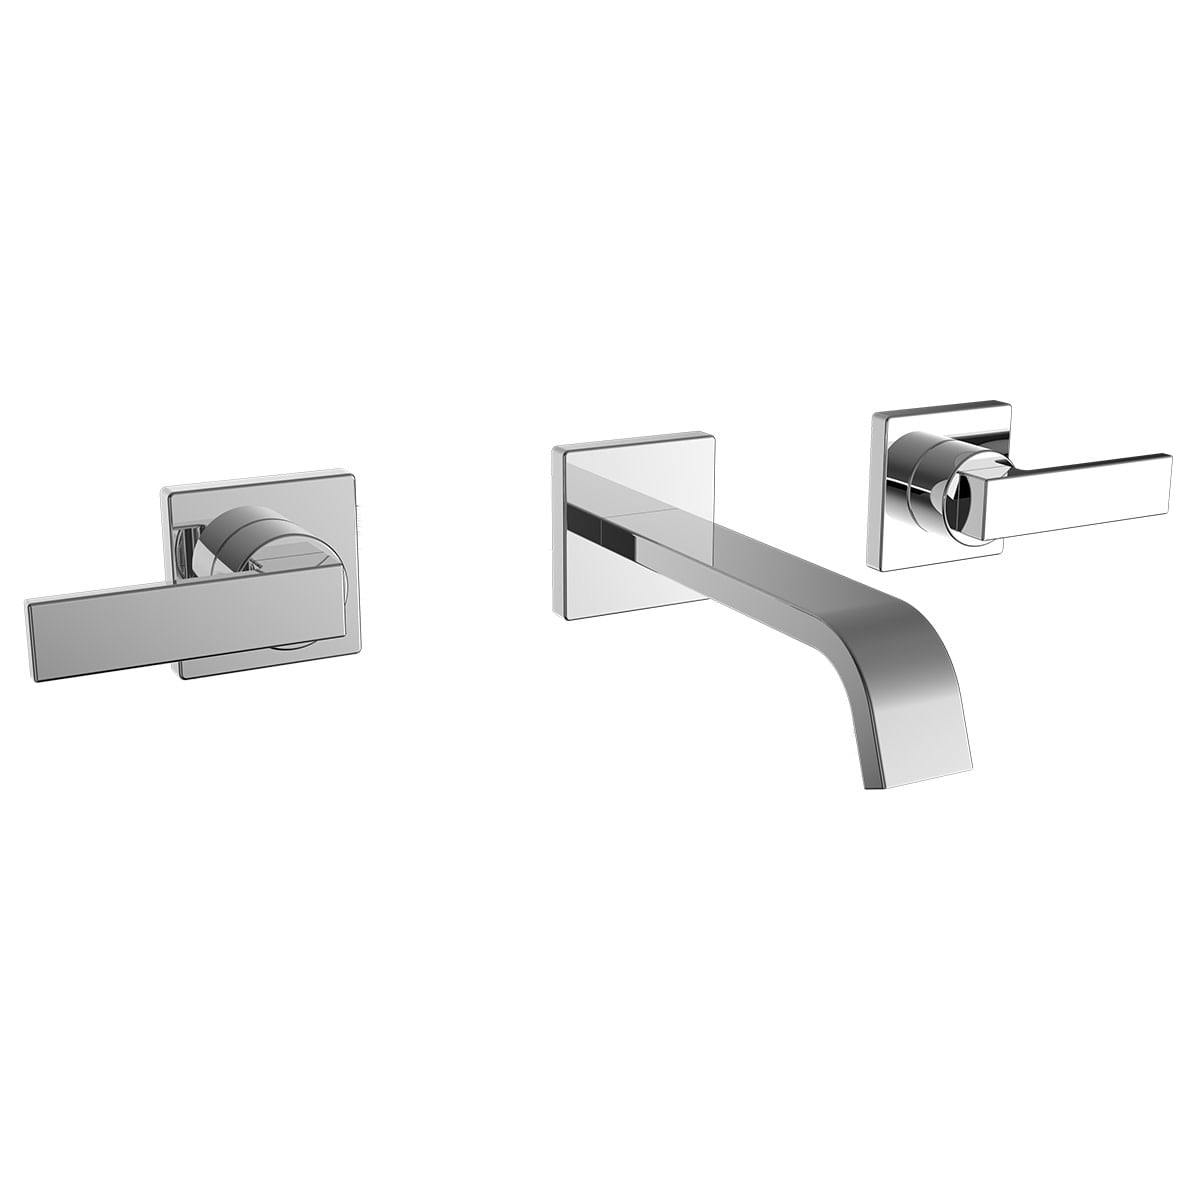 Lura Polished Chrome Wall-Mounted Bathroom Faucet with Dual Handles